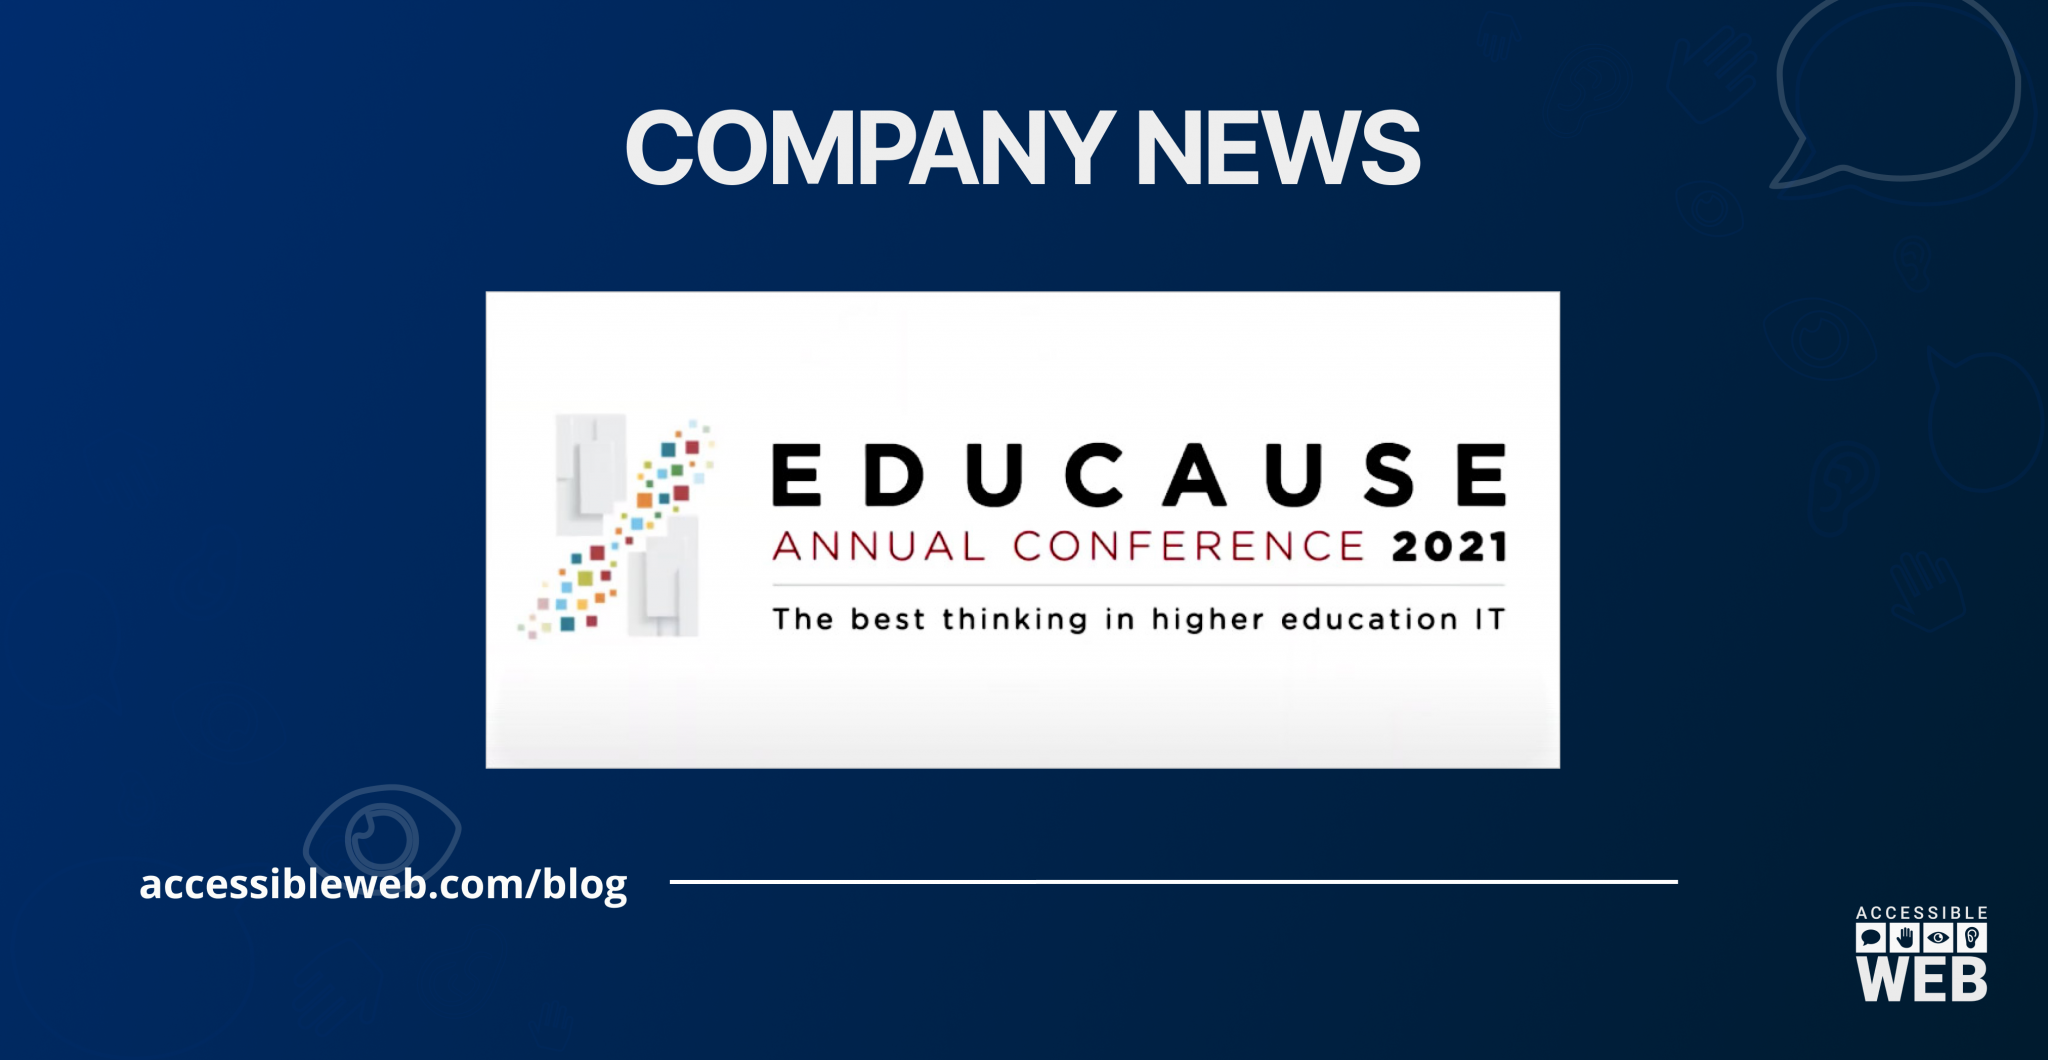 "Educause annual conference 2021, the best thinking in higher education IT."